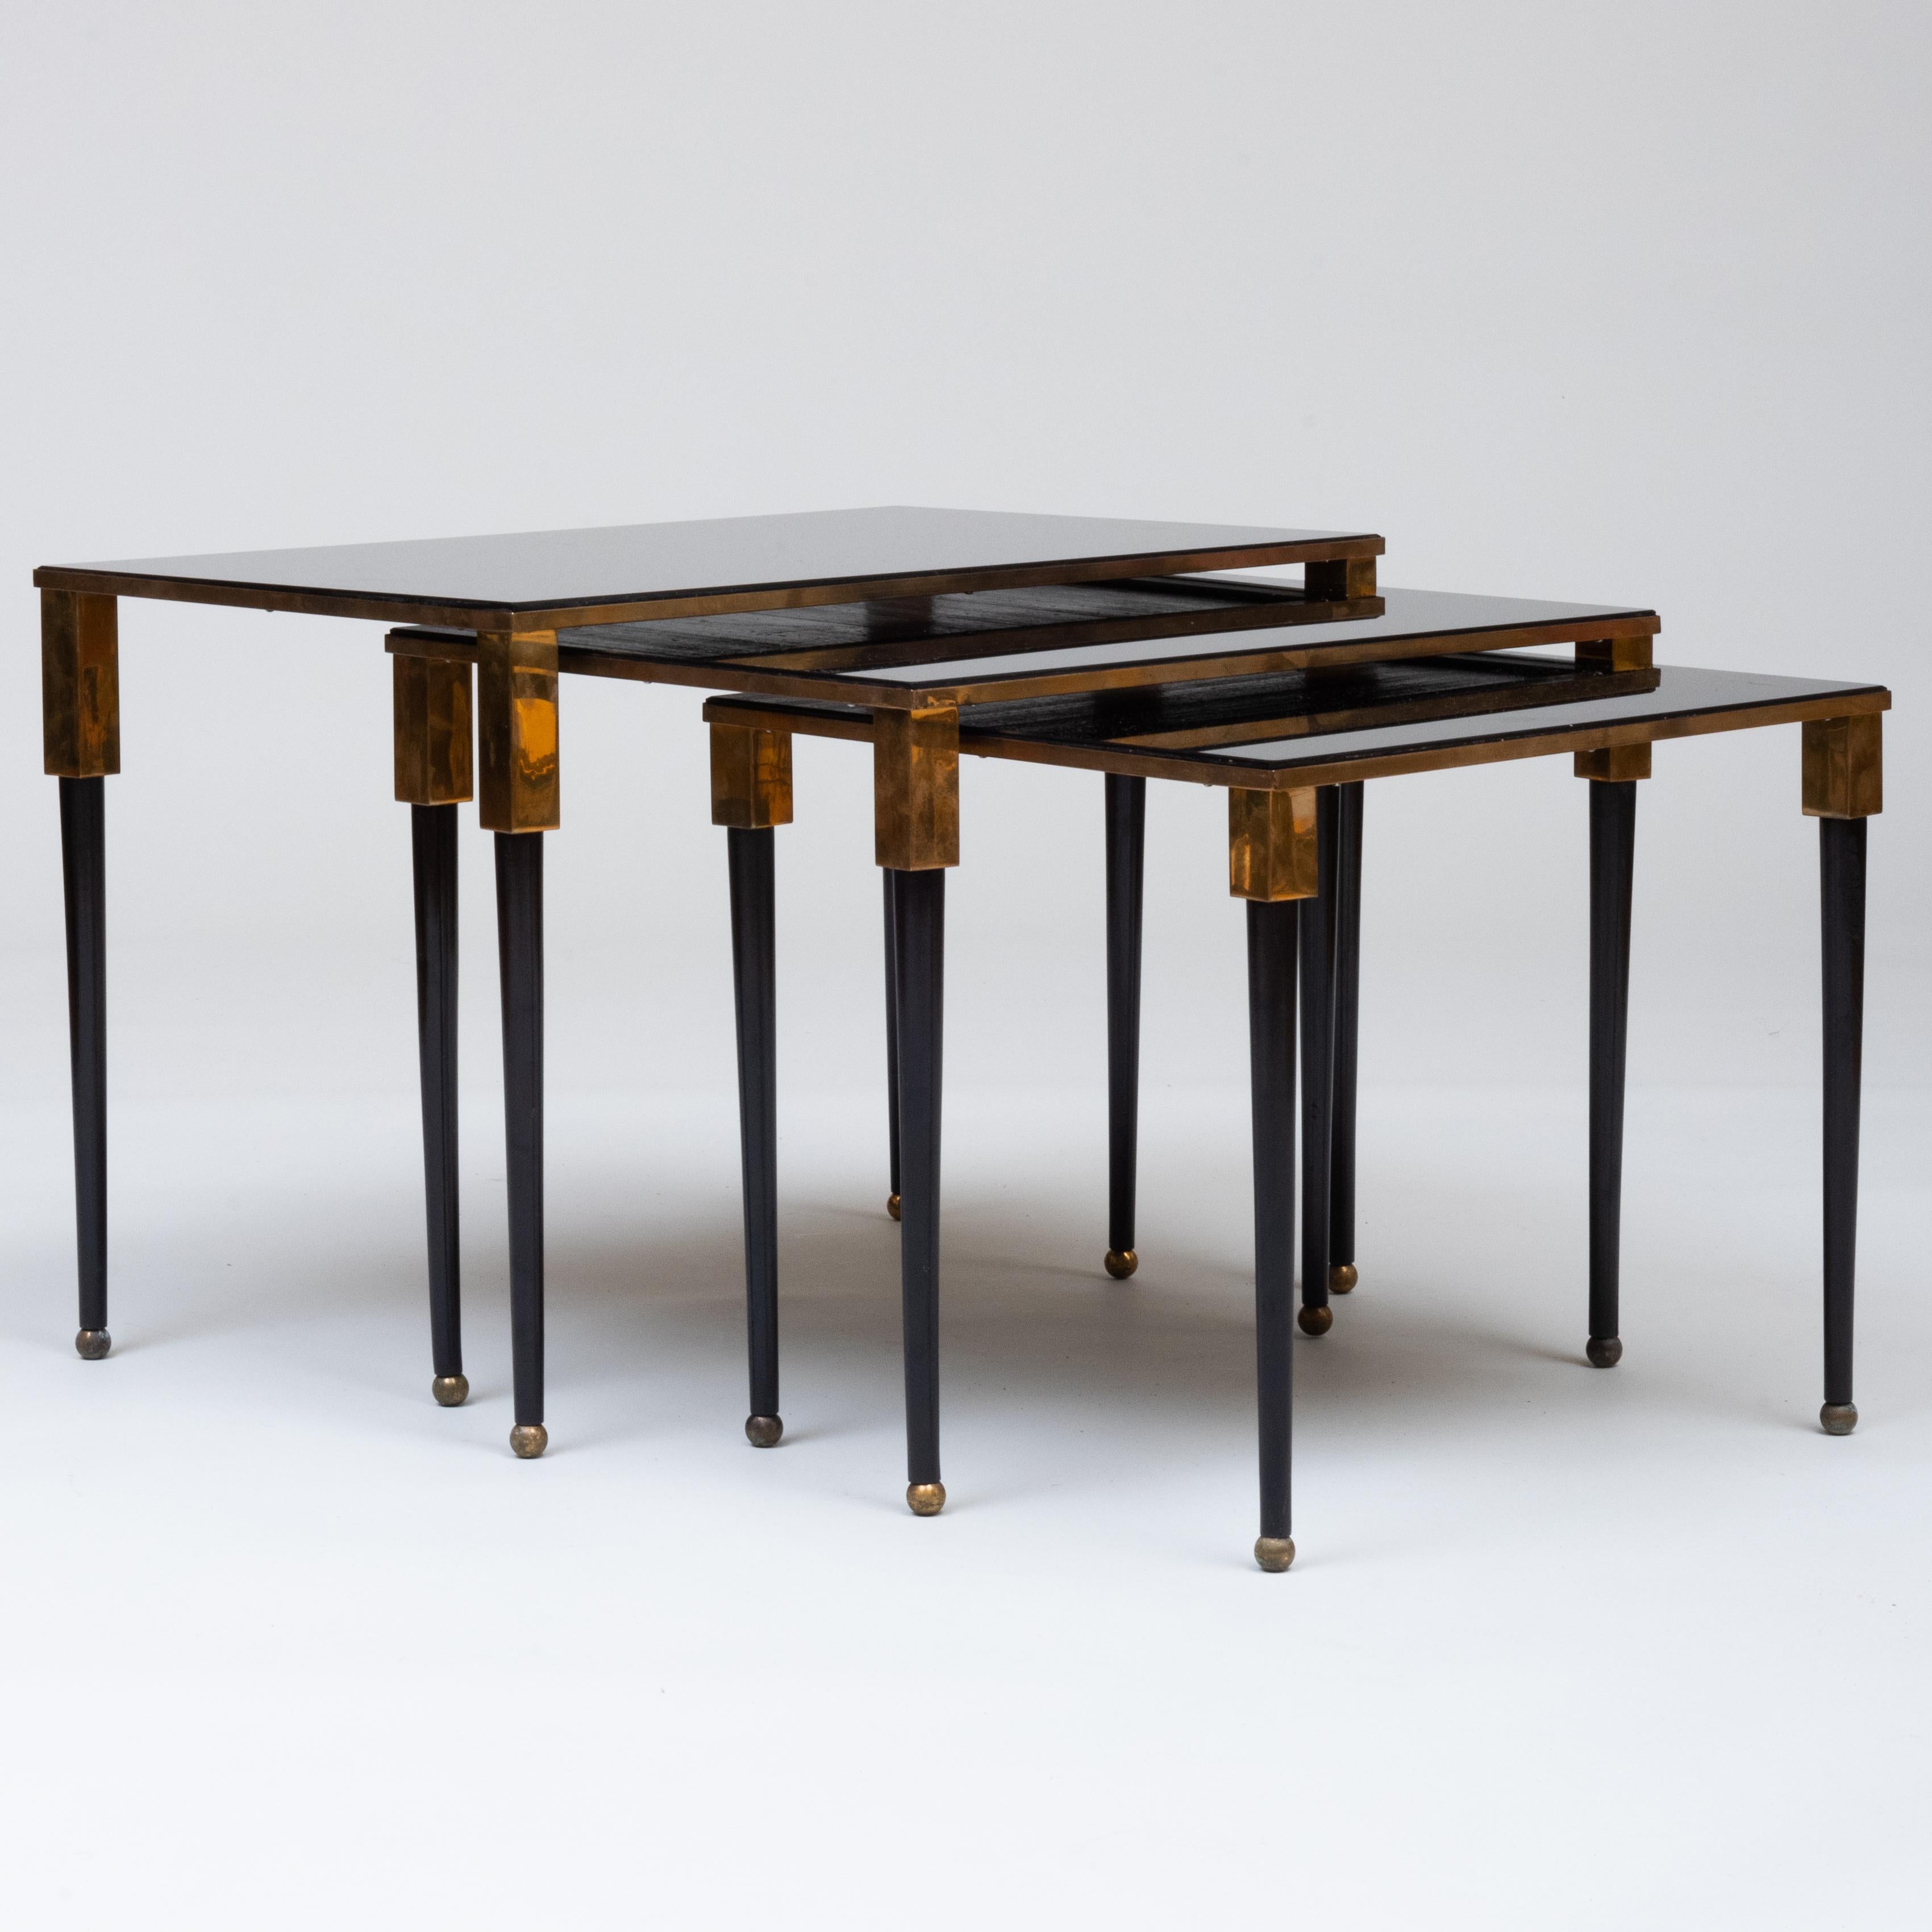 Set of 3 brass nesting tables by French Art Moderne inset with black glass top. Provenance: Bernd Goeckler Antiques, Inc., NY., February 9, 2007.